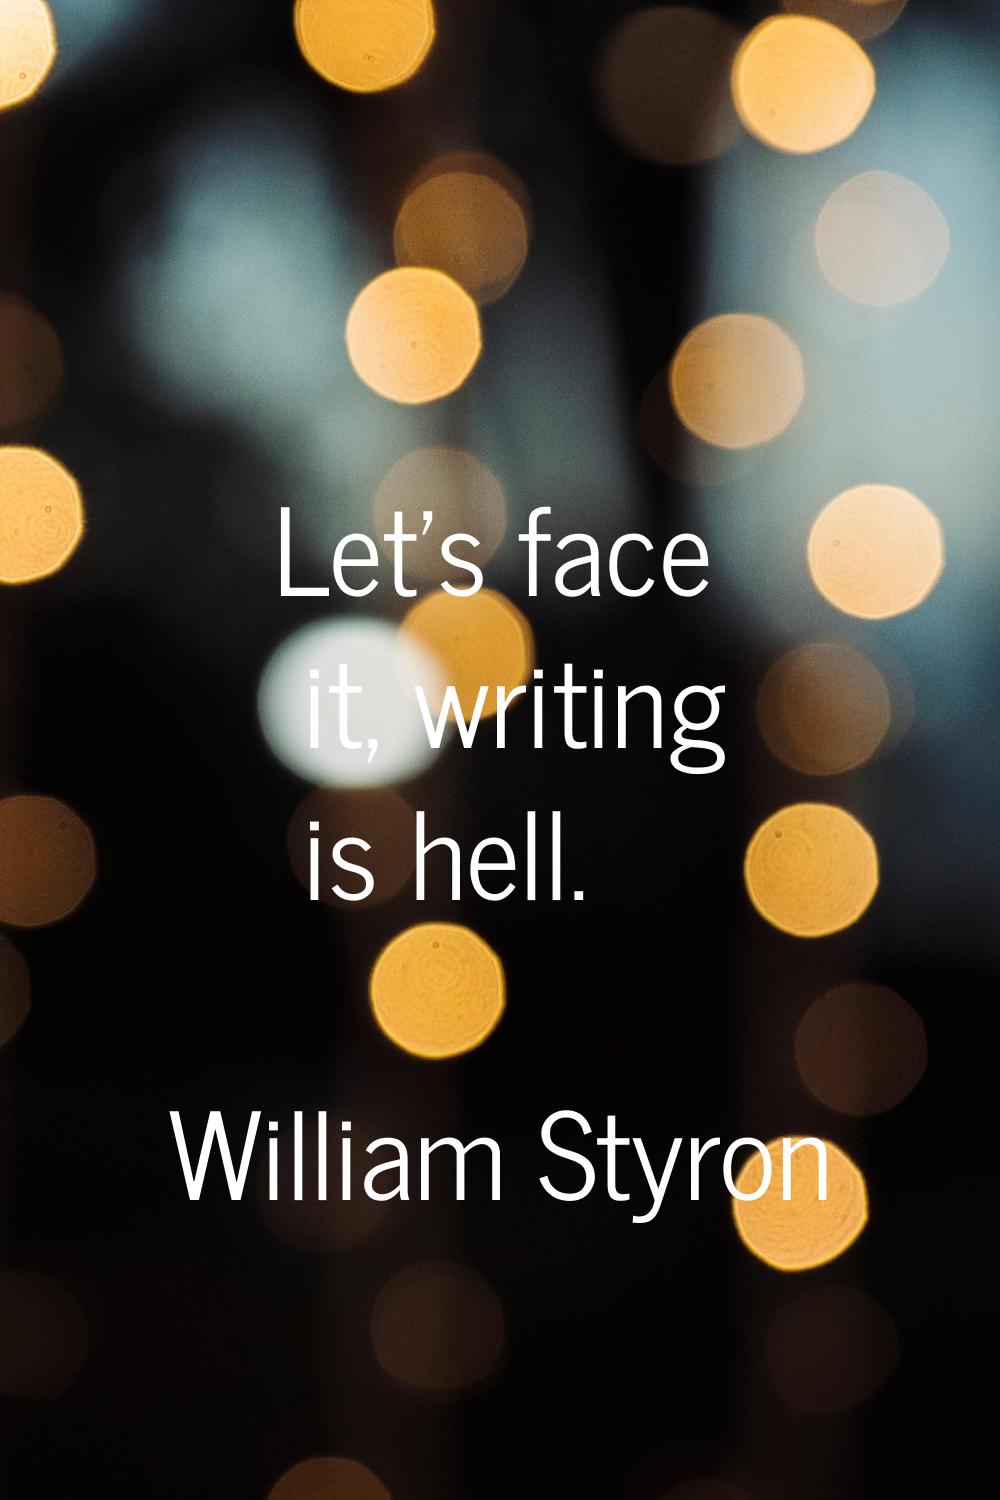 Let's face it, writing is hell.